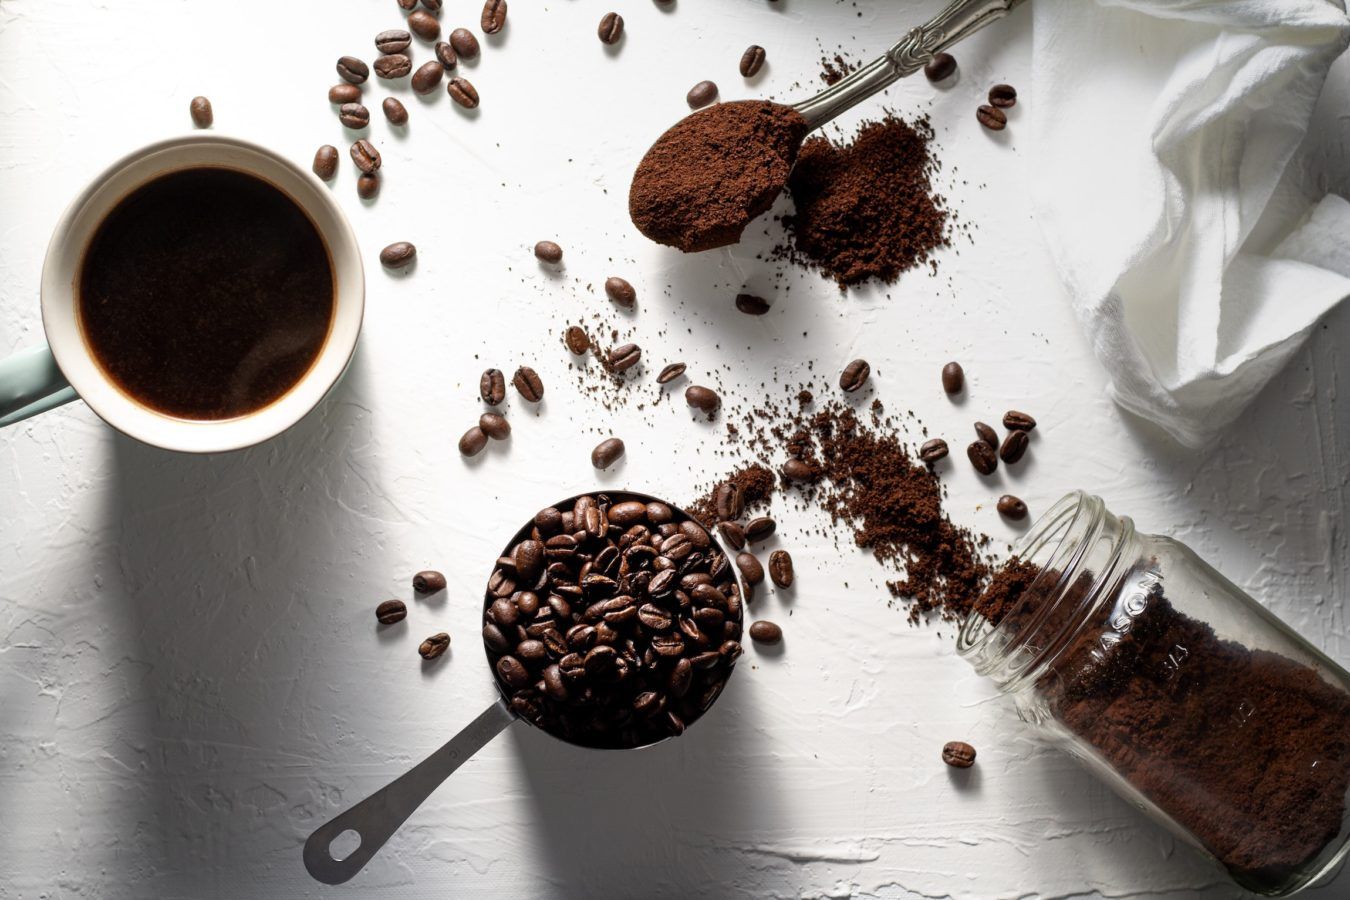 Global warming might affect the taste of your coffee in the future